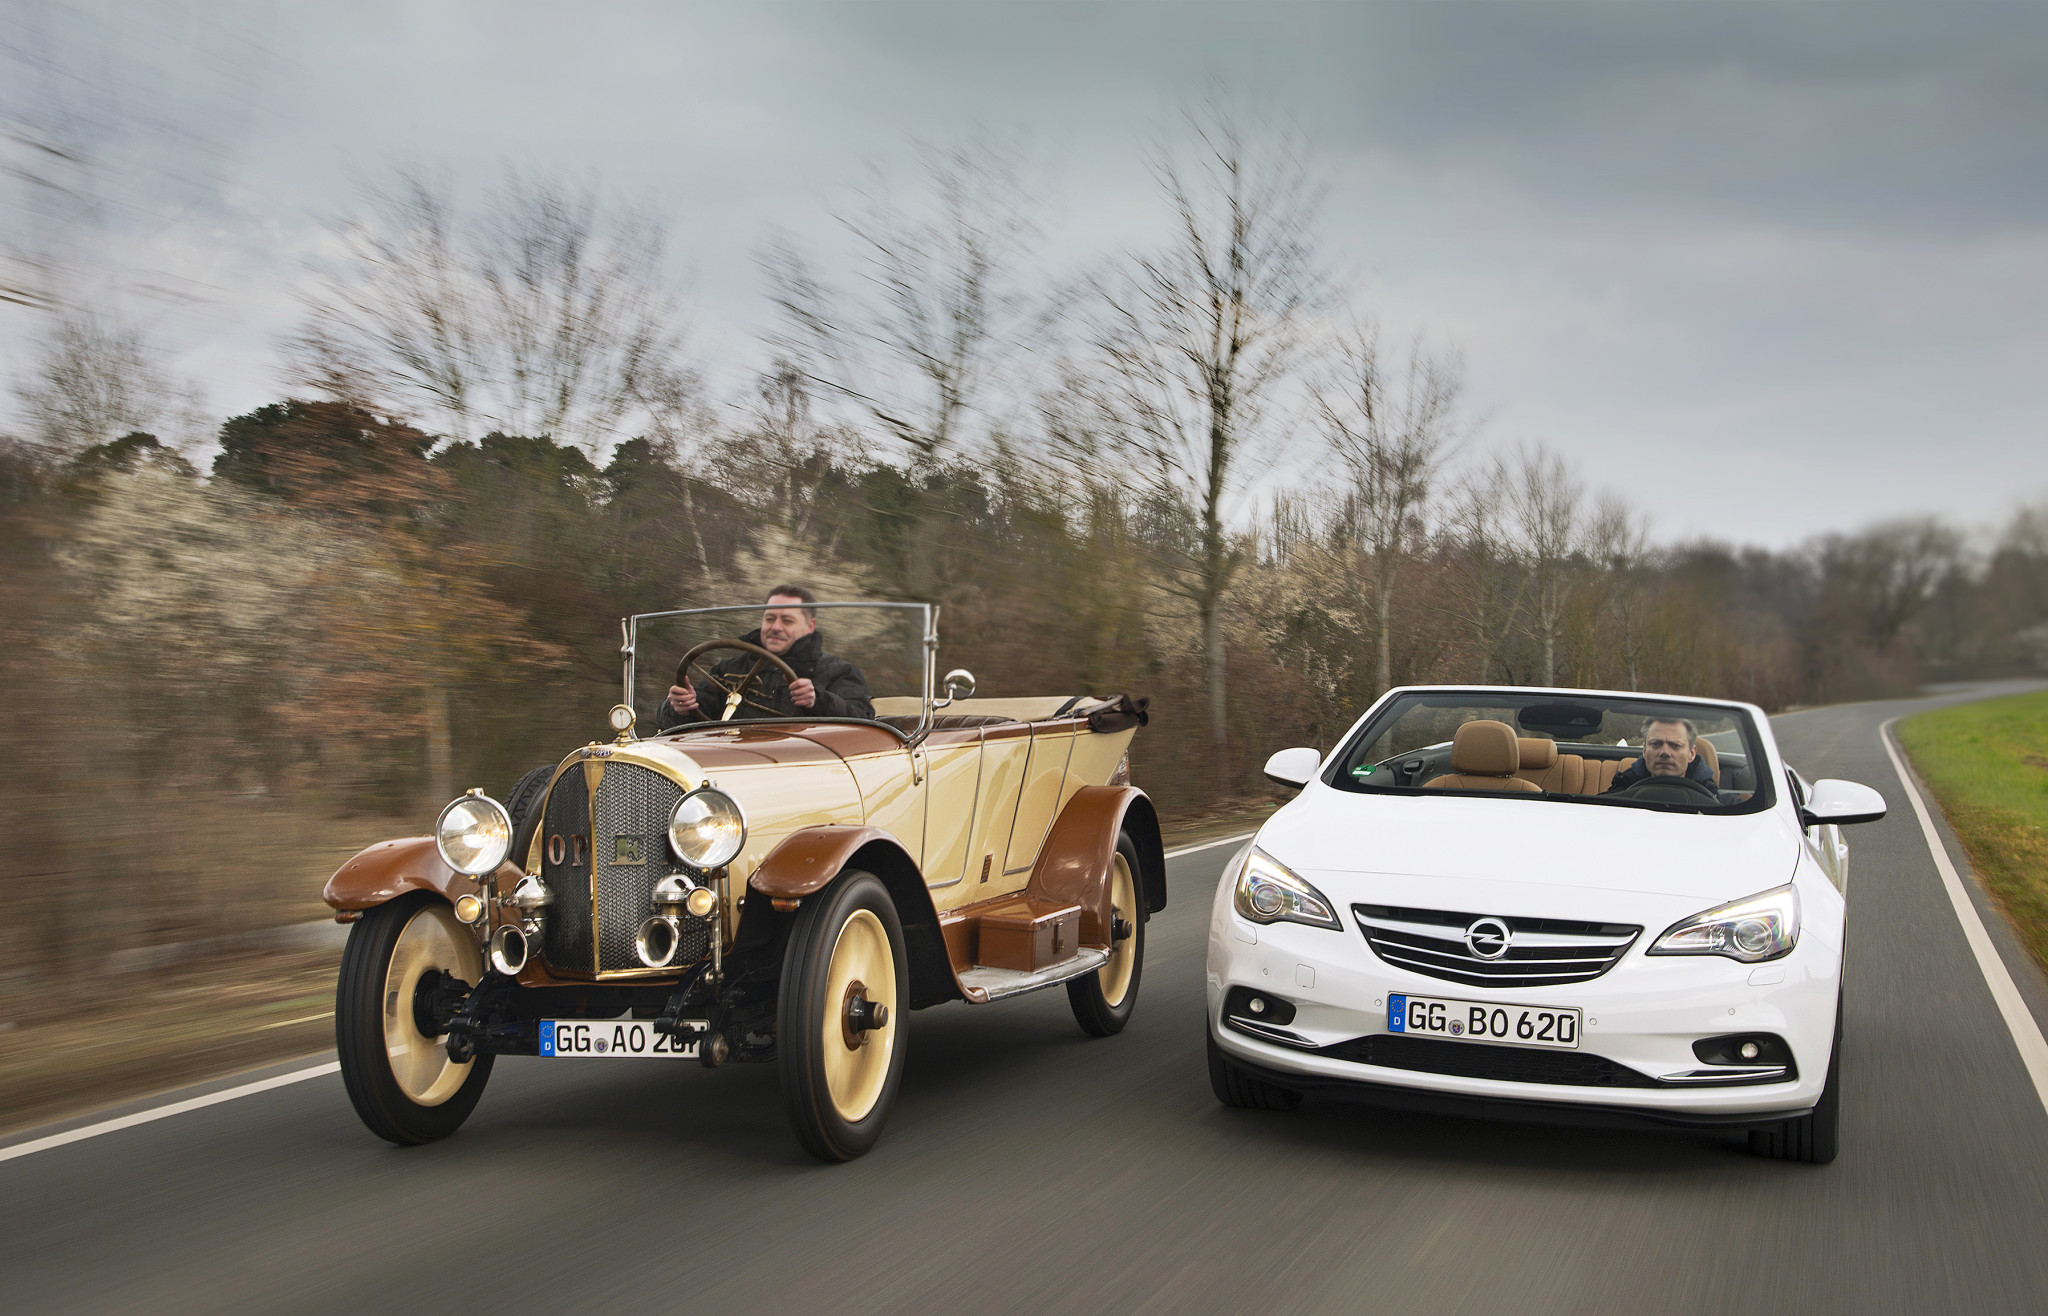 Accompanied by the Opel Cascada, the Opel 8/25 PS displays 1920s flair.